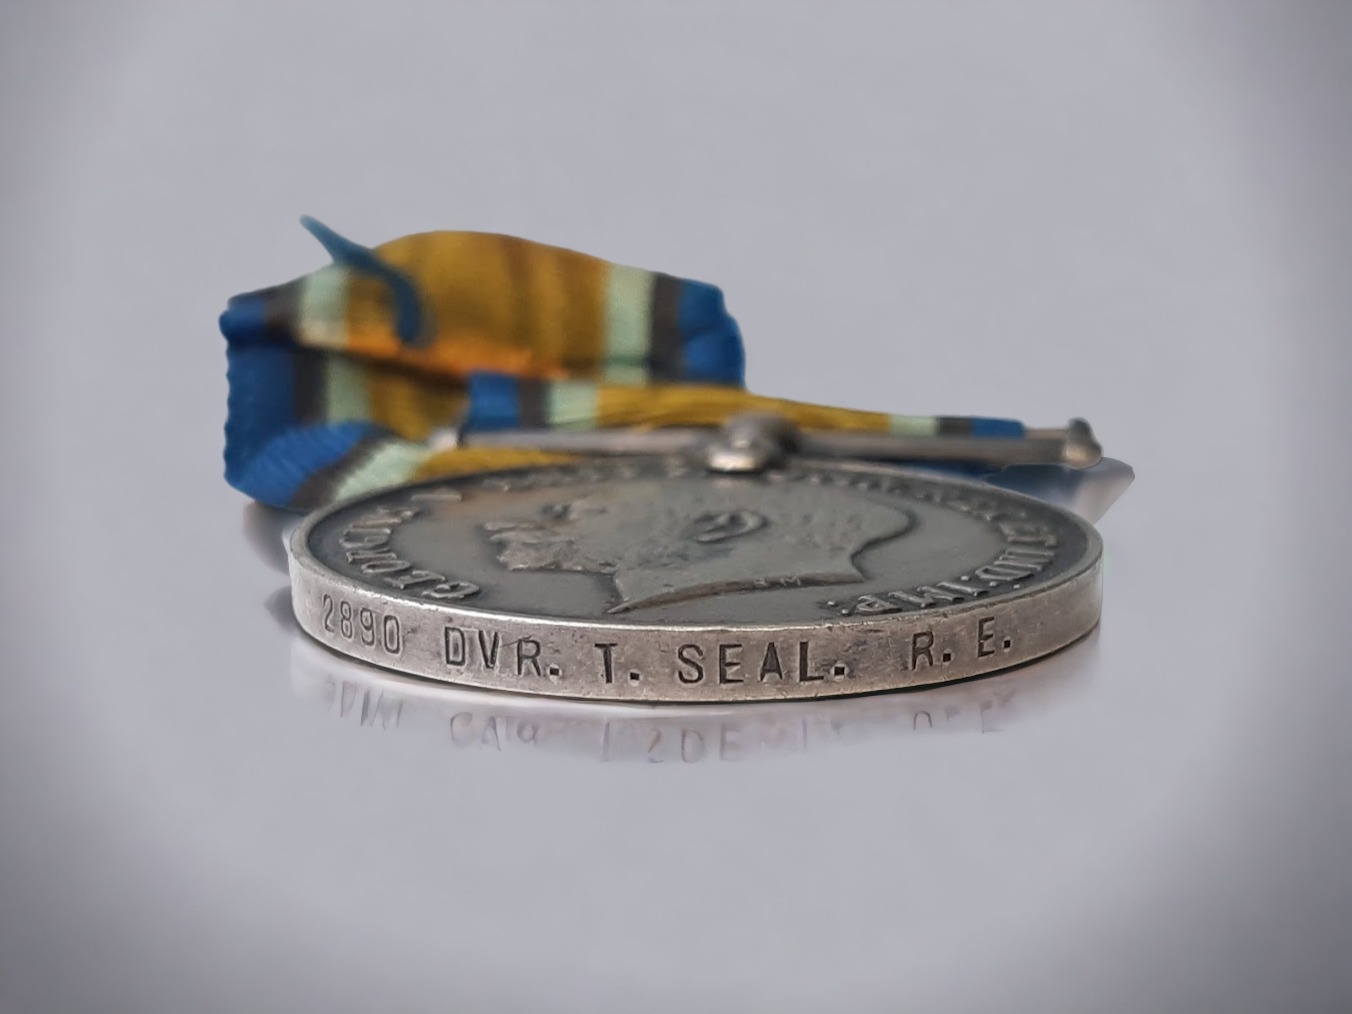 TWO WWI GEORGE V BRITISH WAR MEDALS. WITH RIBBONS. ONE NAMED 'DVR. T. SEAL. R.E.' THE OTHER - Image 4 of 4